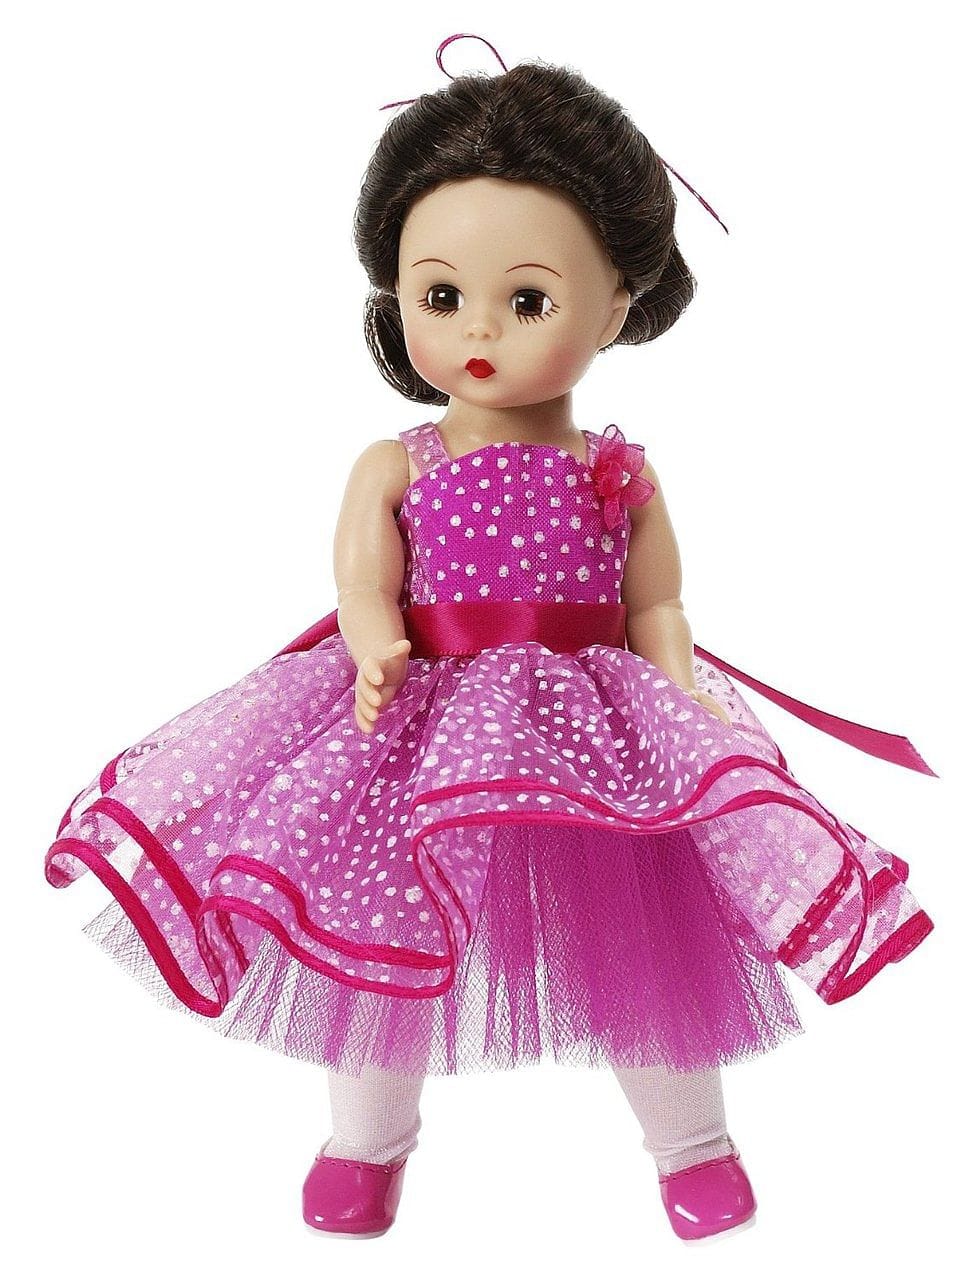 Birthday Wishes Brunette Doll - Shelburne Country Store